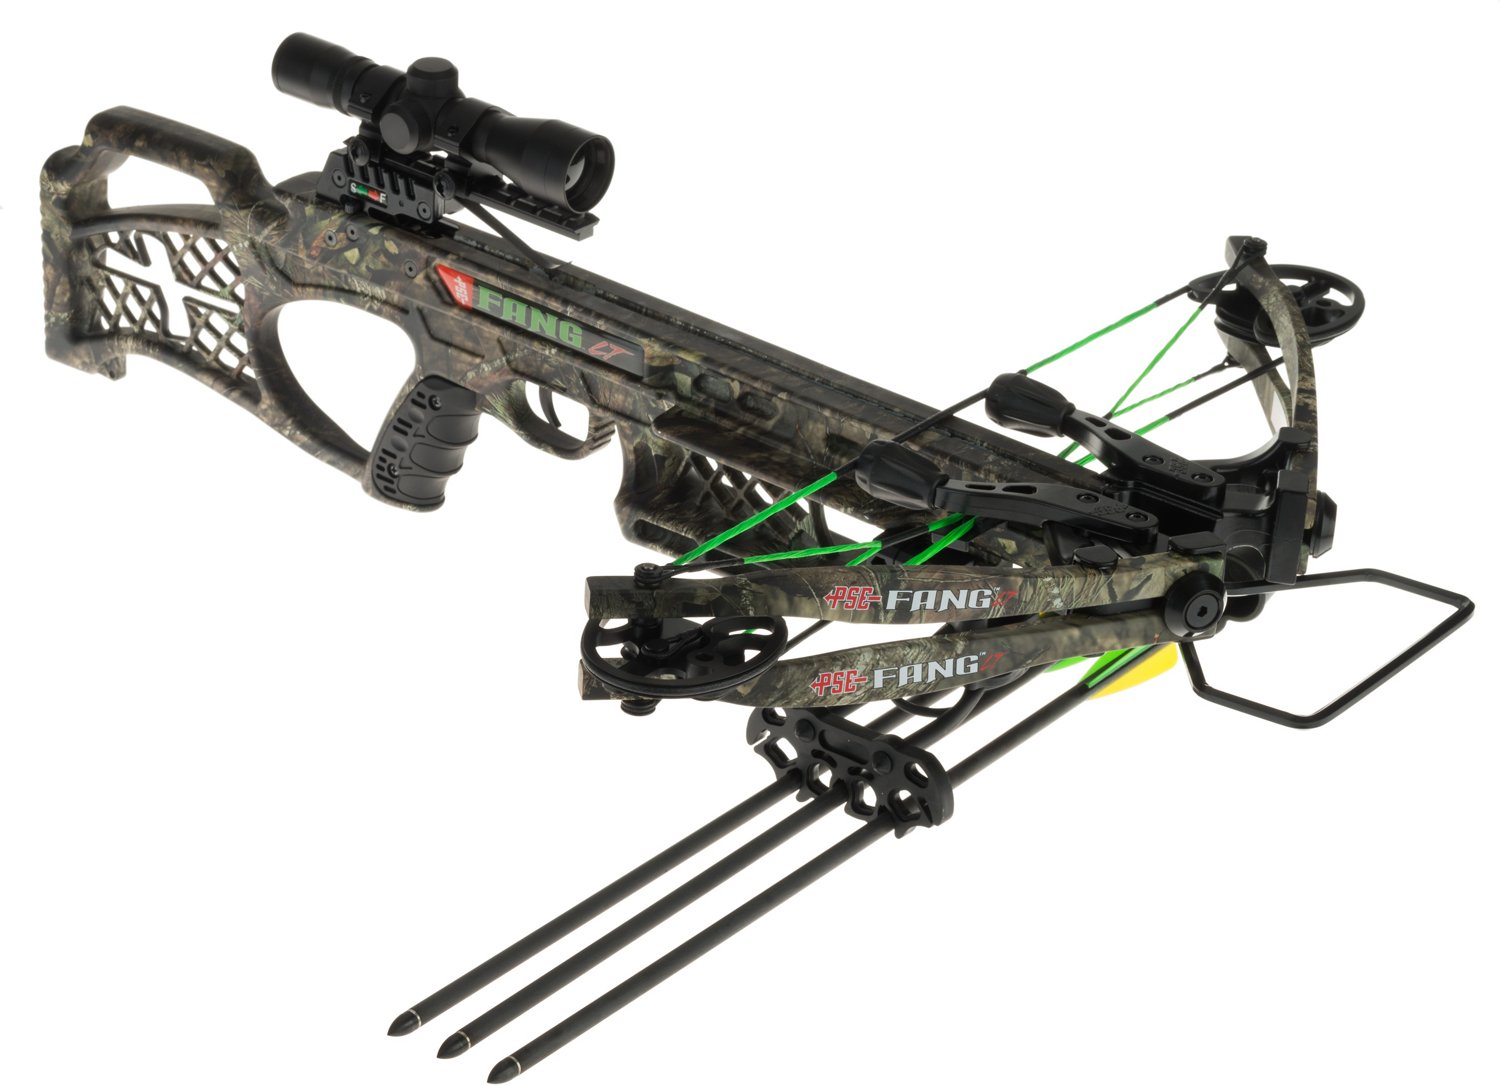 PSE Fang LT Compound Crossbow,Crossbows,Deer Hunting,Hunting,Outdoors.